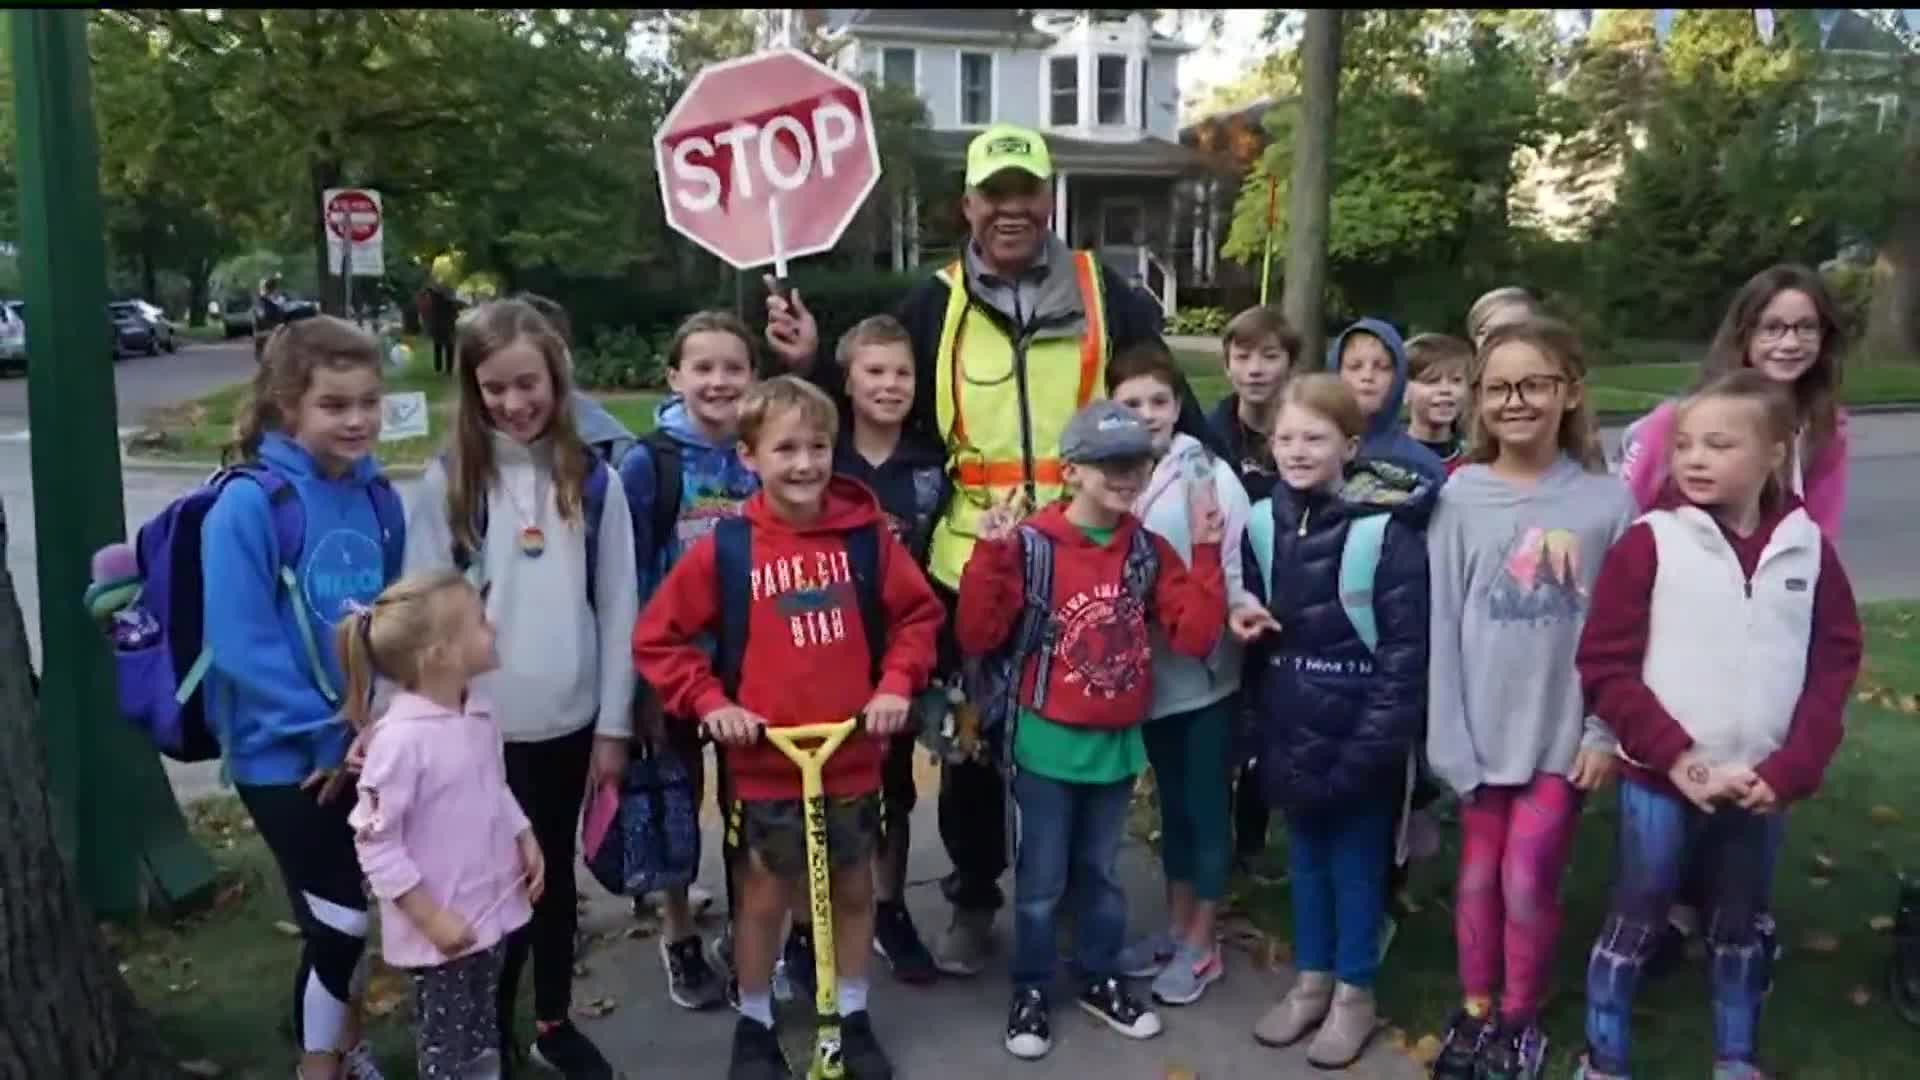 More than 100 celebrated this crossing guard`s birthday